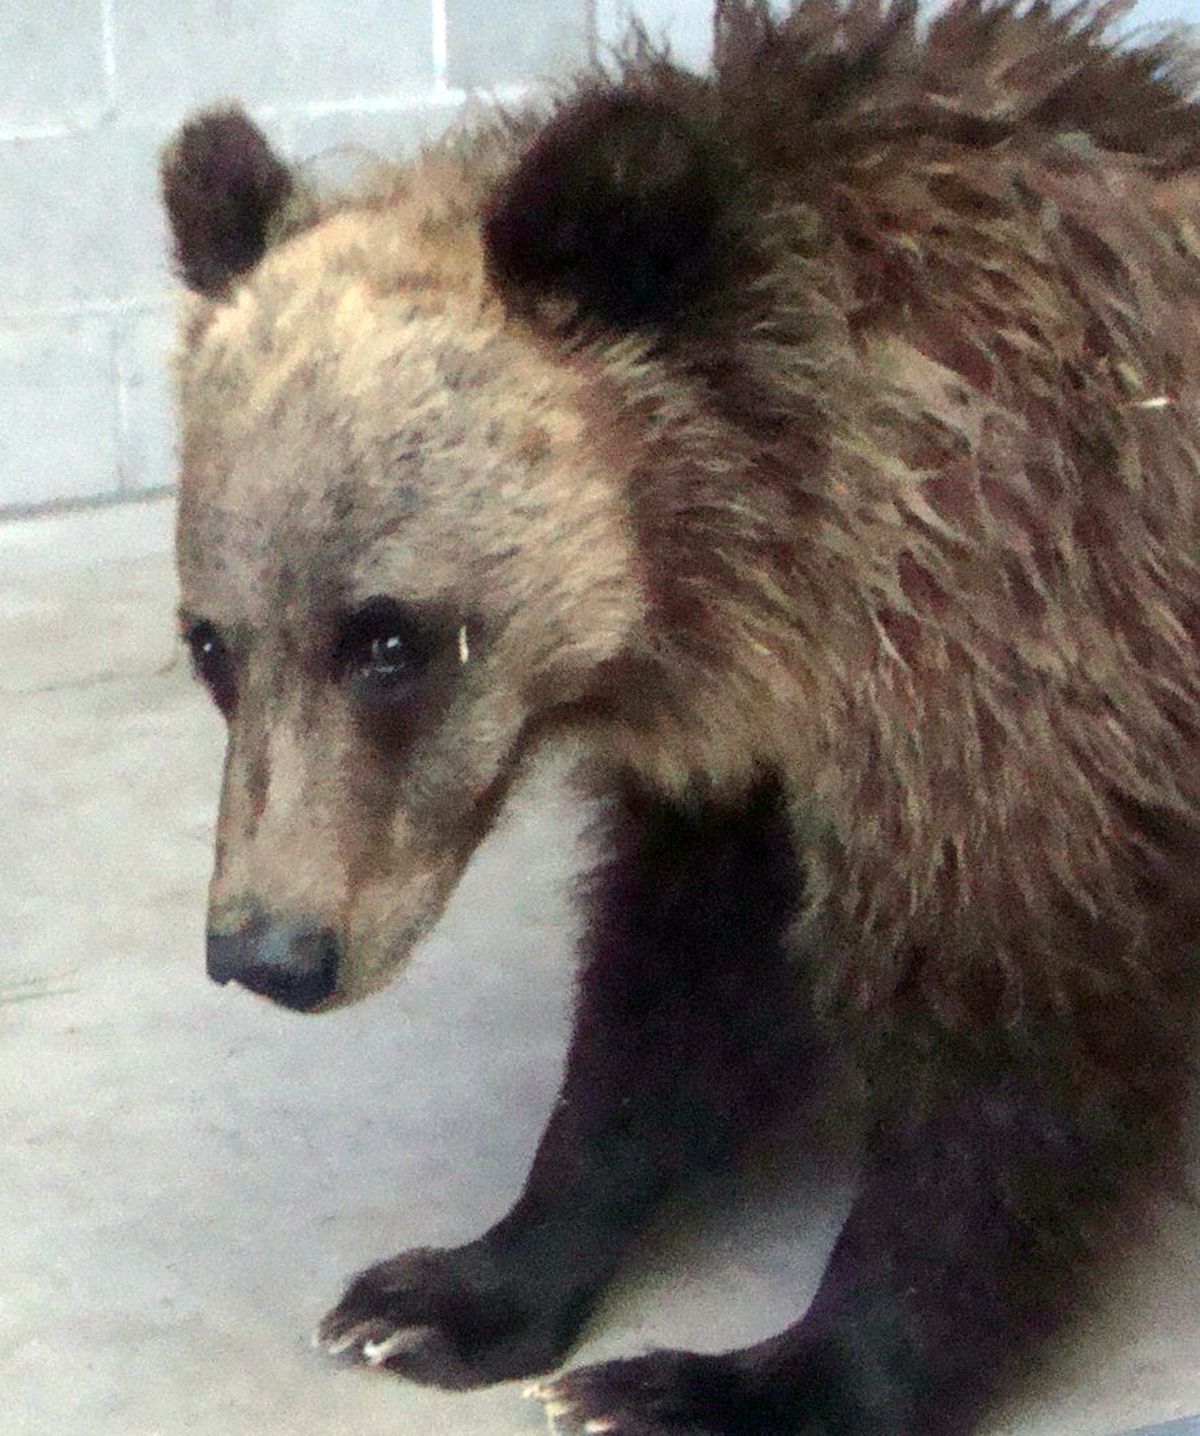 This photo provided by provided by ZooMontana shows one of the female grizzly bear cubs whose mother killed one person and mauled two others in a late-night attack at a Montana campground last week. (Courtesy of ZooMontana / Associated Press)